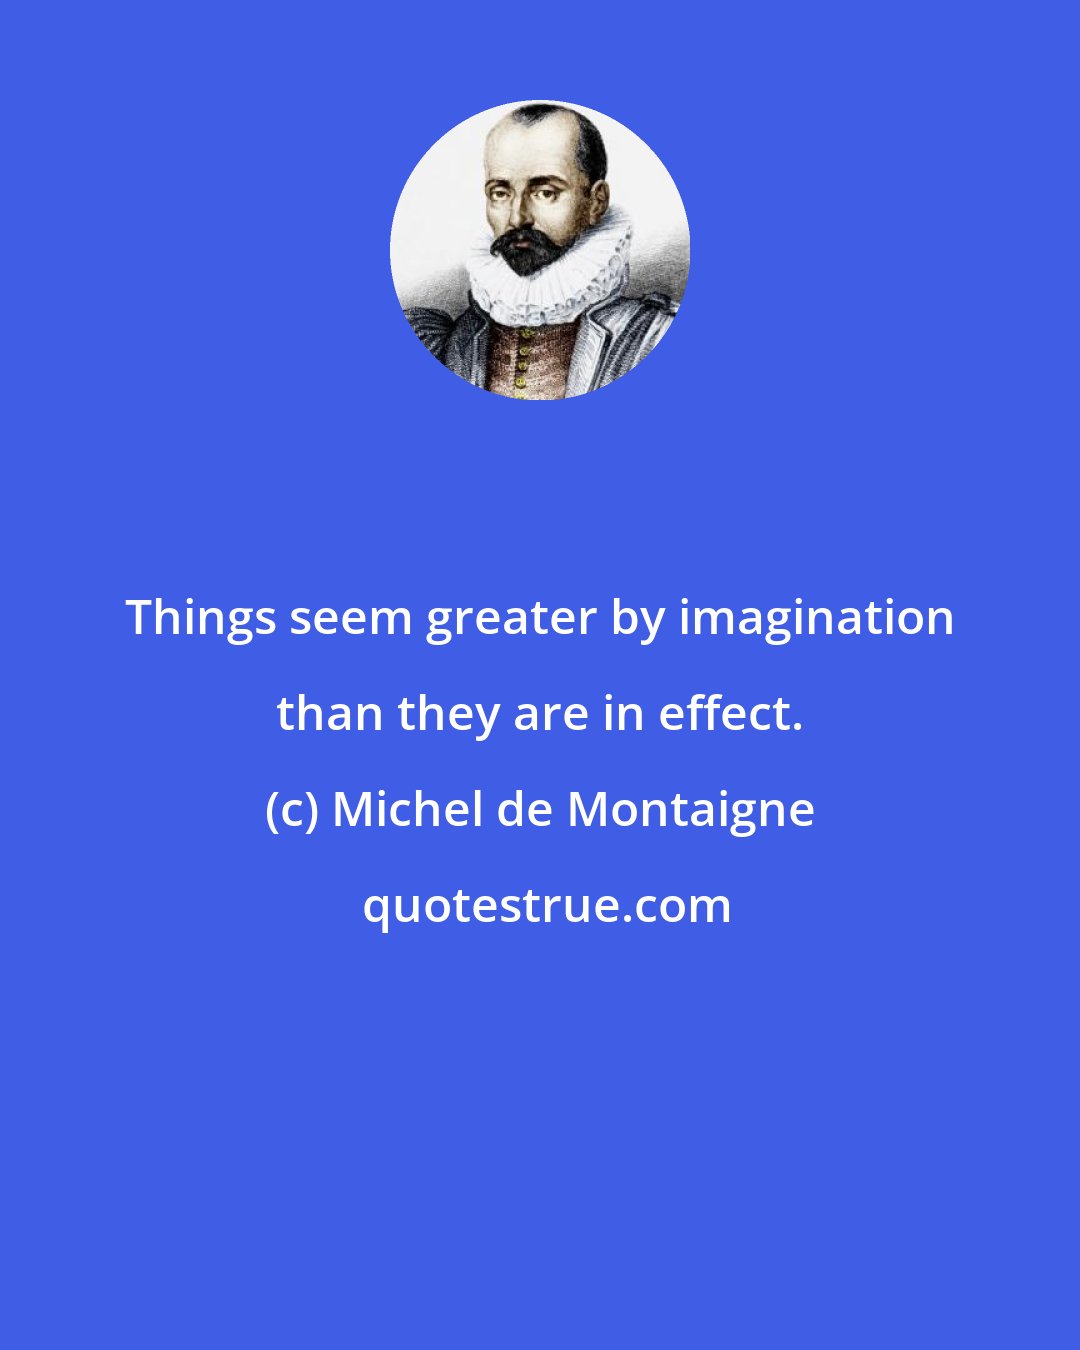 Michel de Montaigne: Things seem greater by imagination than they are in effect.